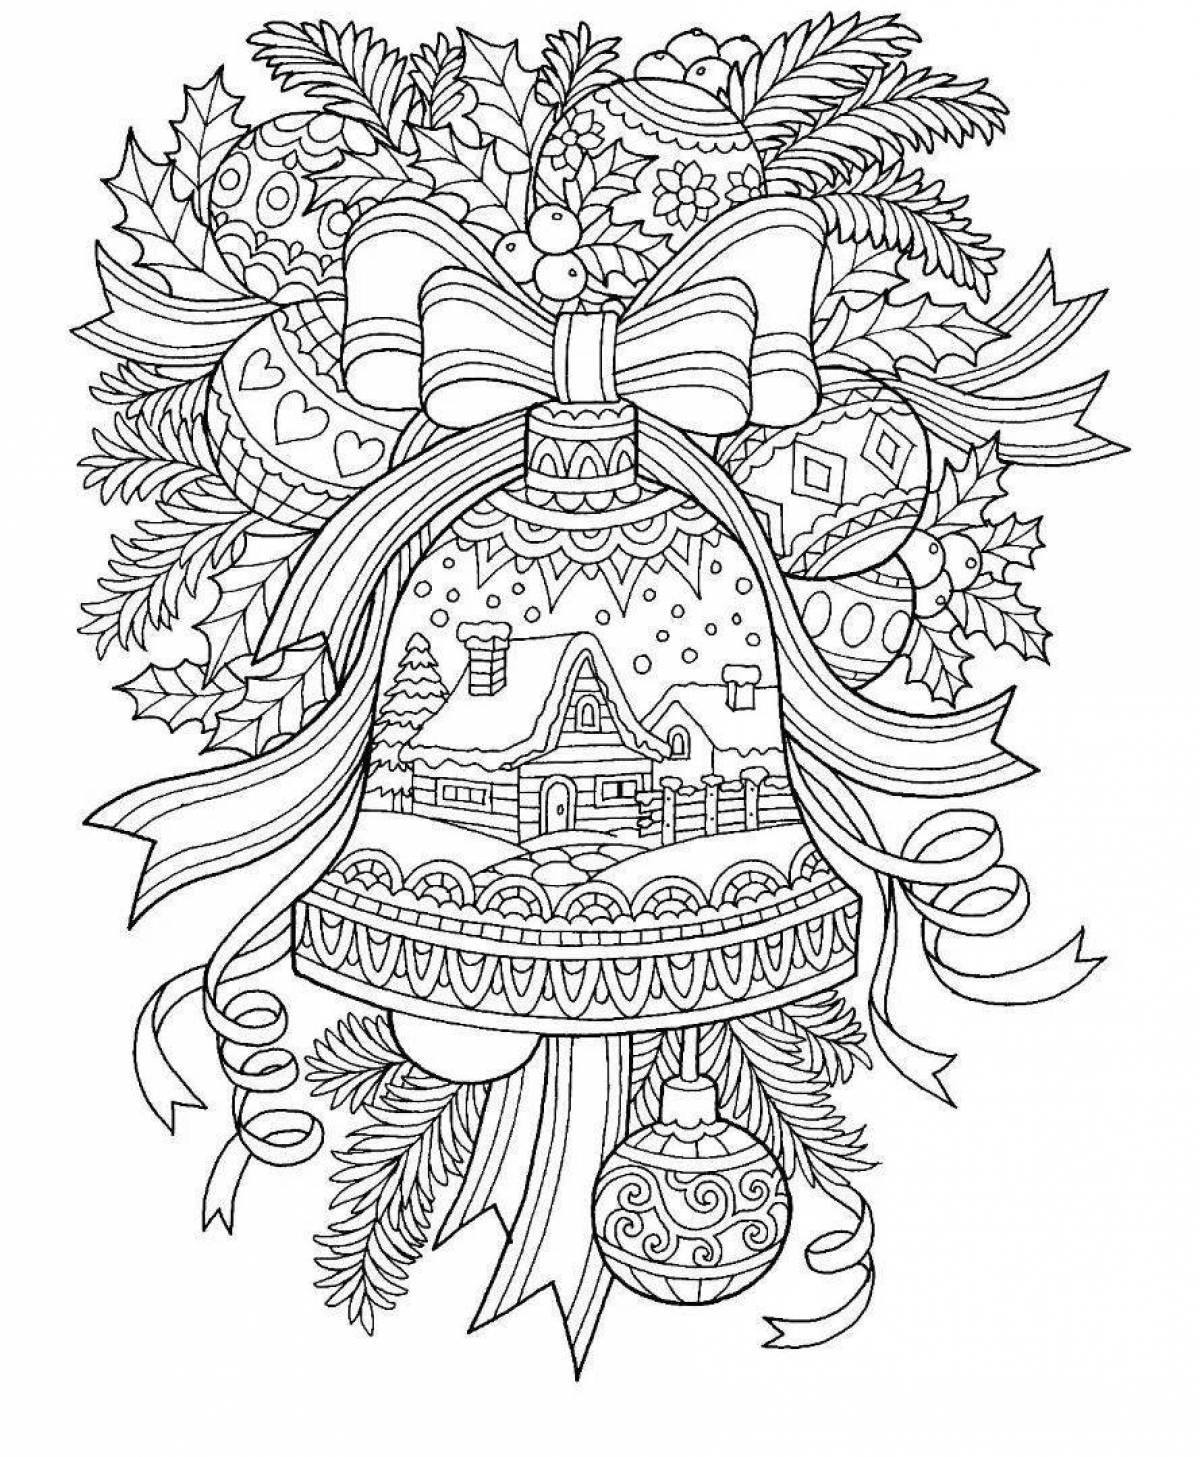 Bright winter anti-stress coloring book for kids